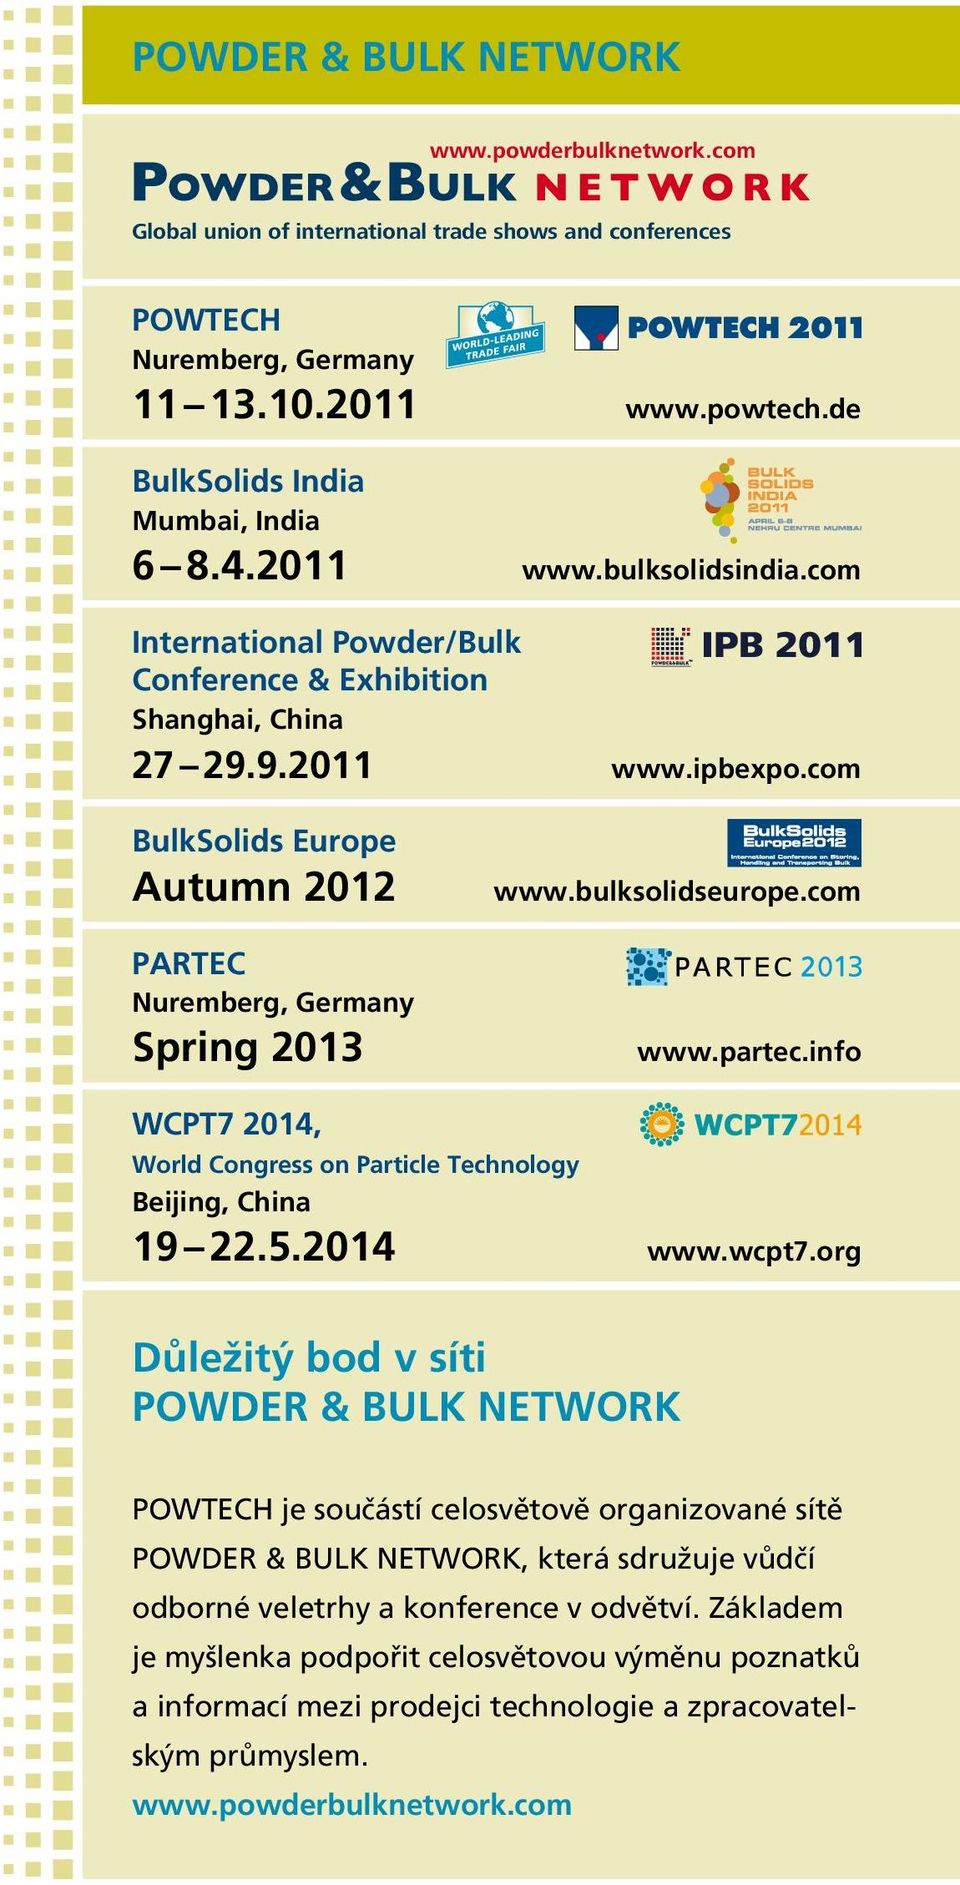 bulksolidseurope.com www.partec.info WCPT7 2014, World Congress on Particle Technology Beijing, China 19 22.5.2014 www.wcpt7.